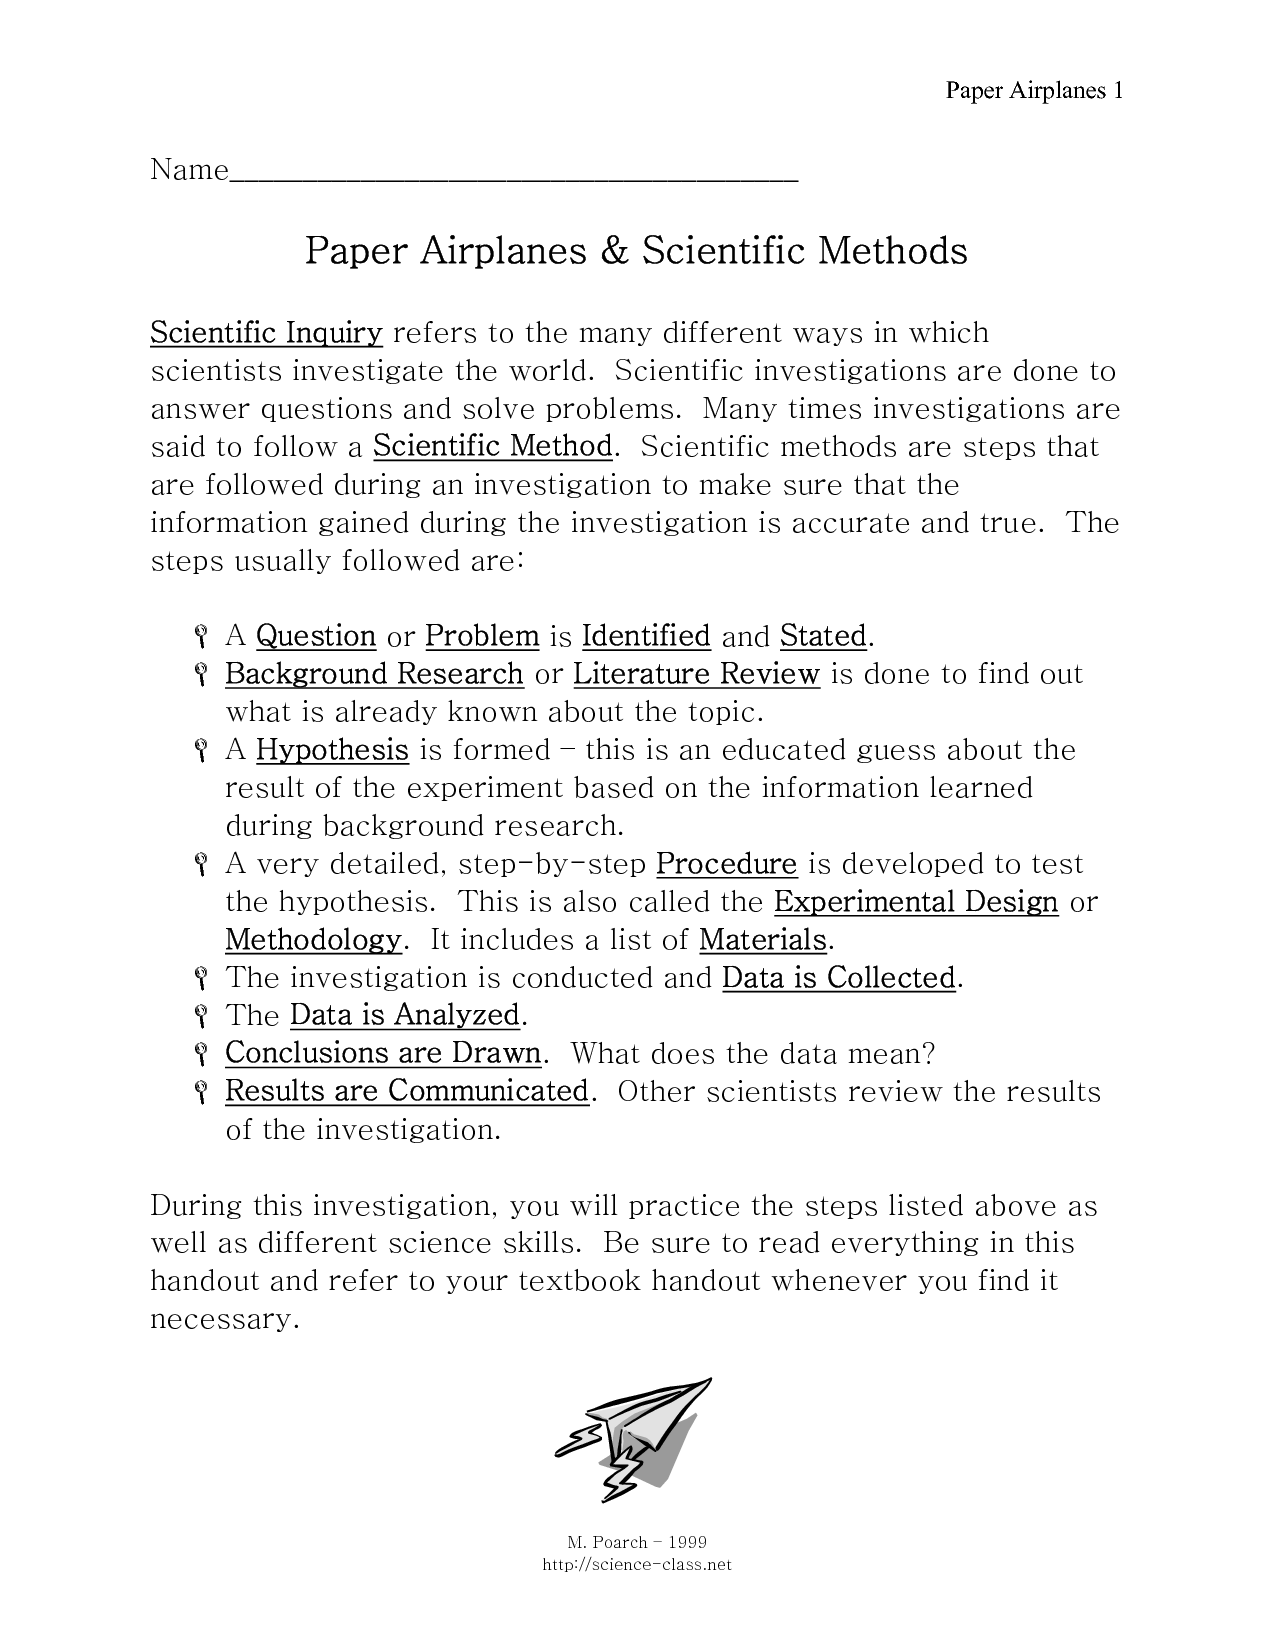 paper airplane research project